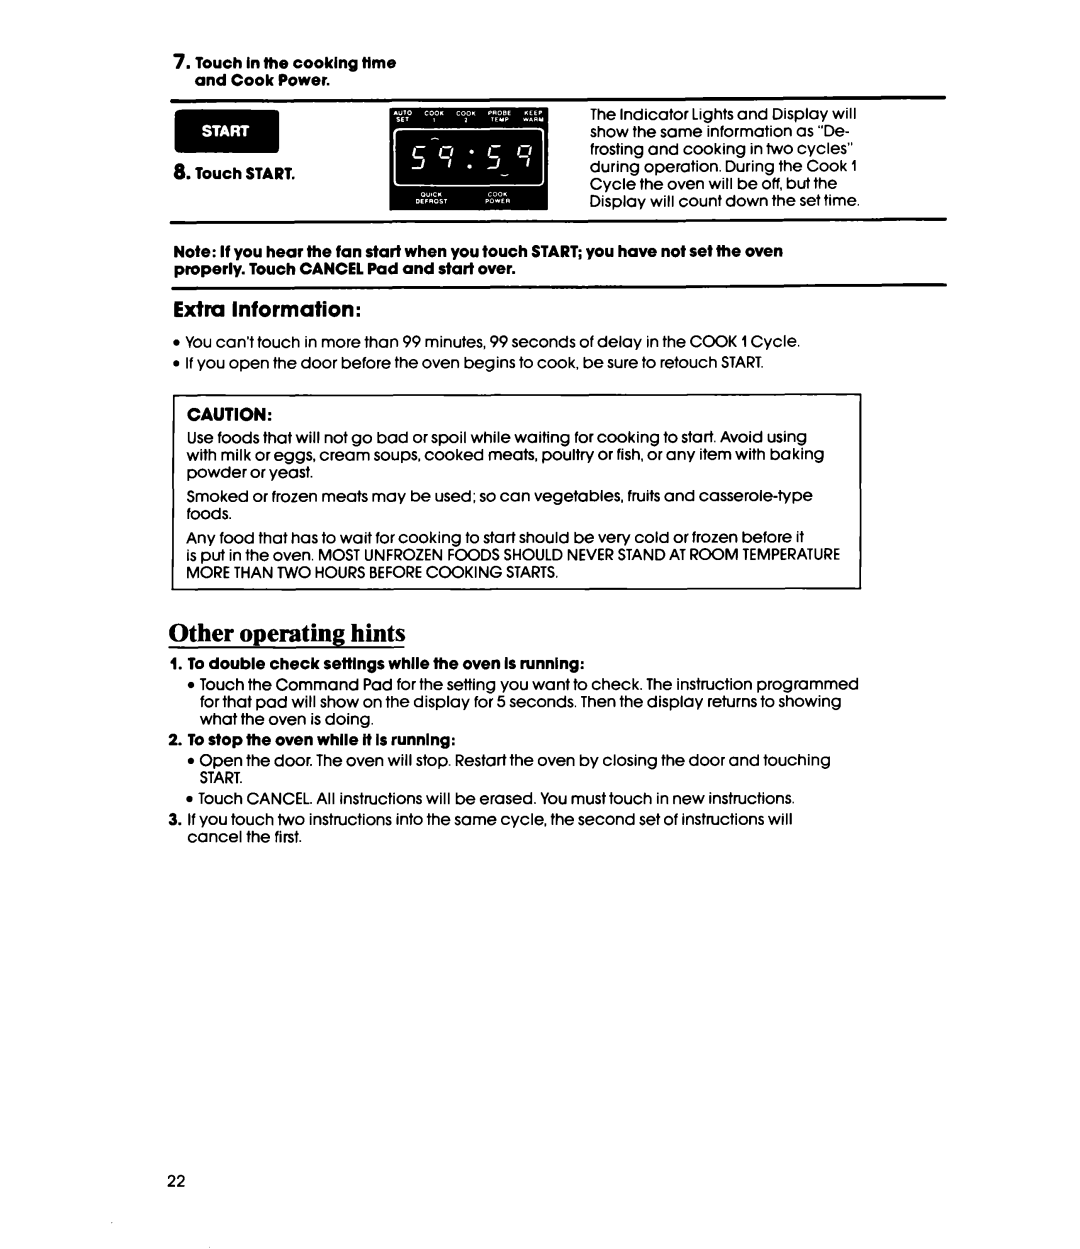 Whirlpool MW36OOXS manual Other operating hints, Extra Information 